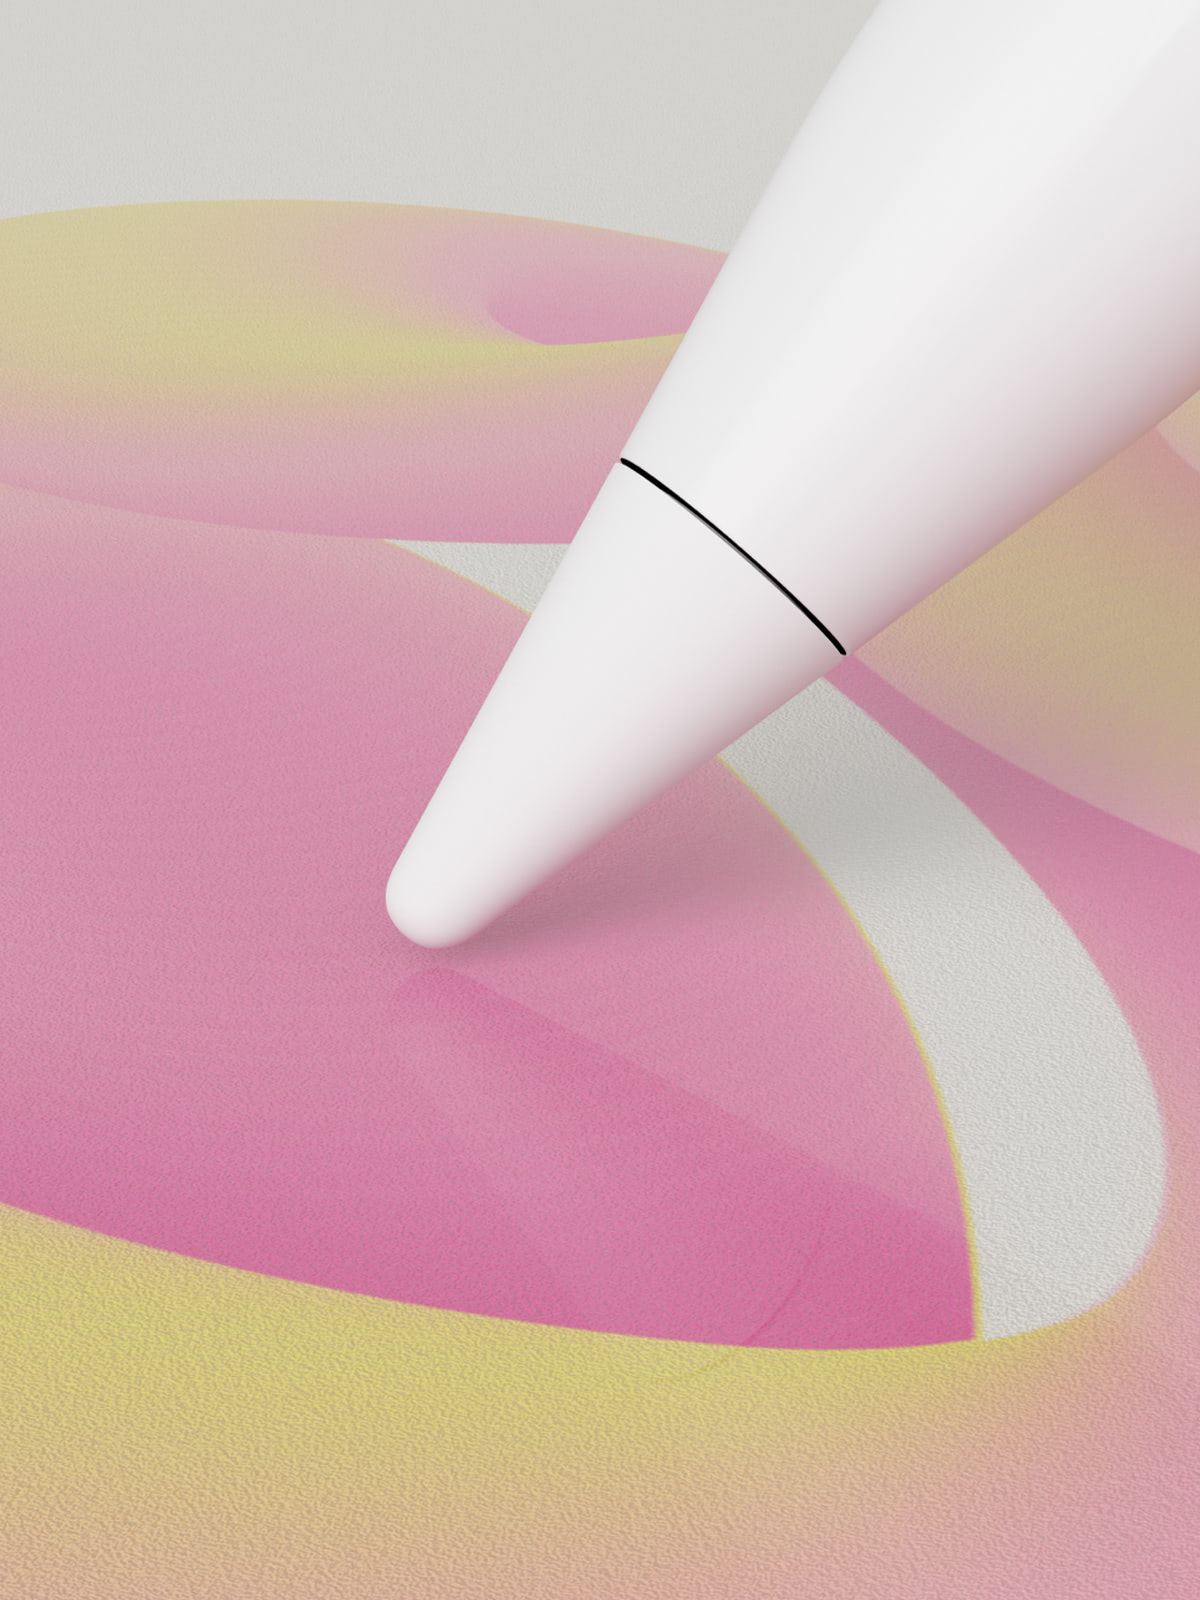 A close-up of an Apple Pencil tip on a screen filled with purple and yellow swirls.  Paperlike’s Nanodots are visible as a grainy texture over the surface of the iPad screen.